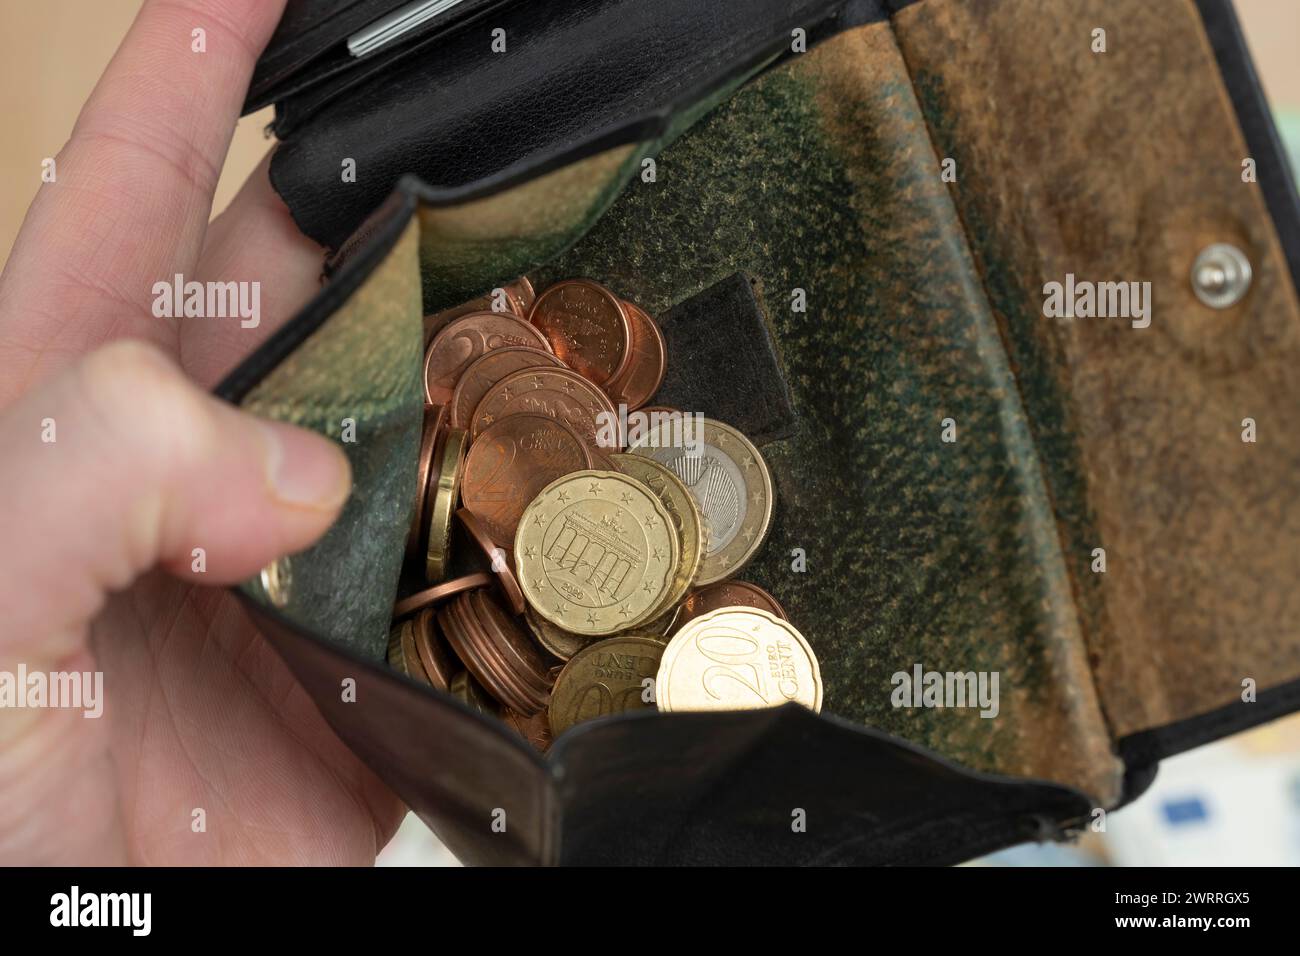 Opened old wallet with euro coins Stock Photo